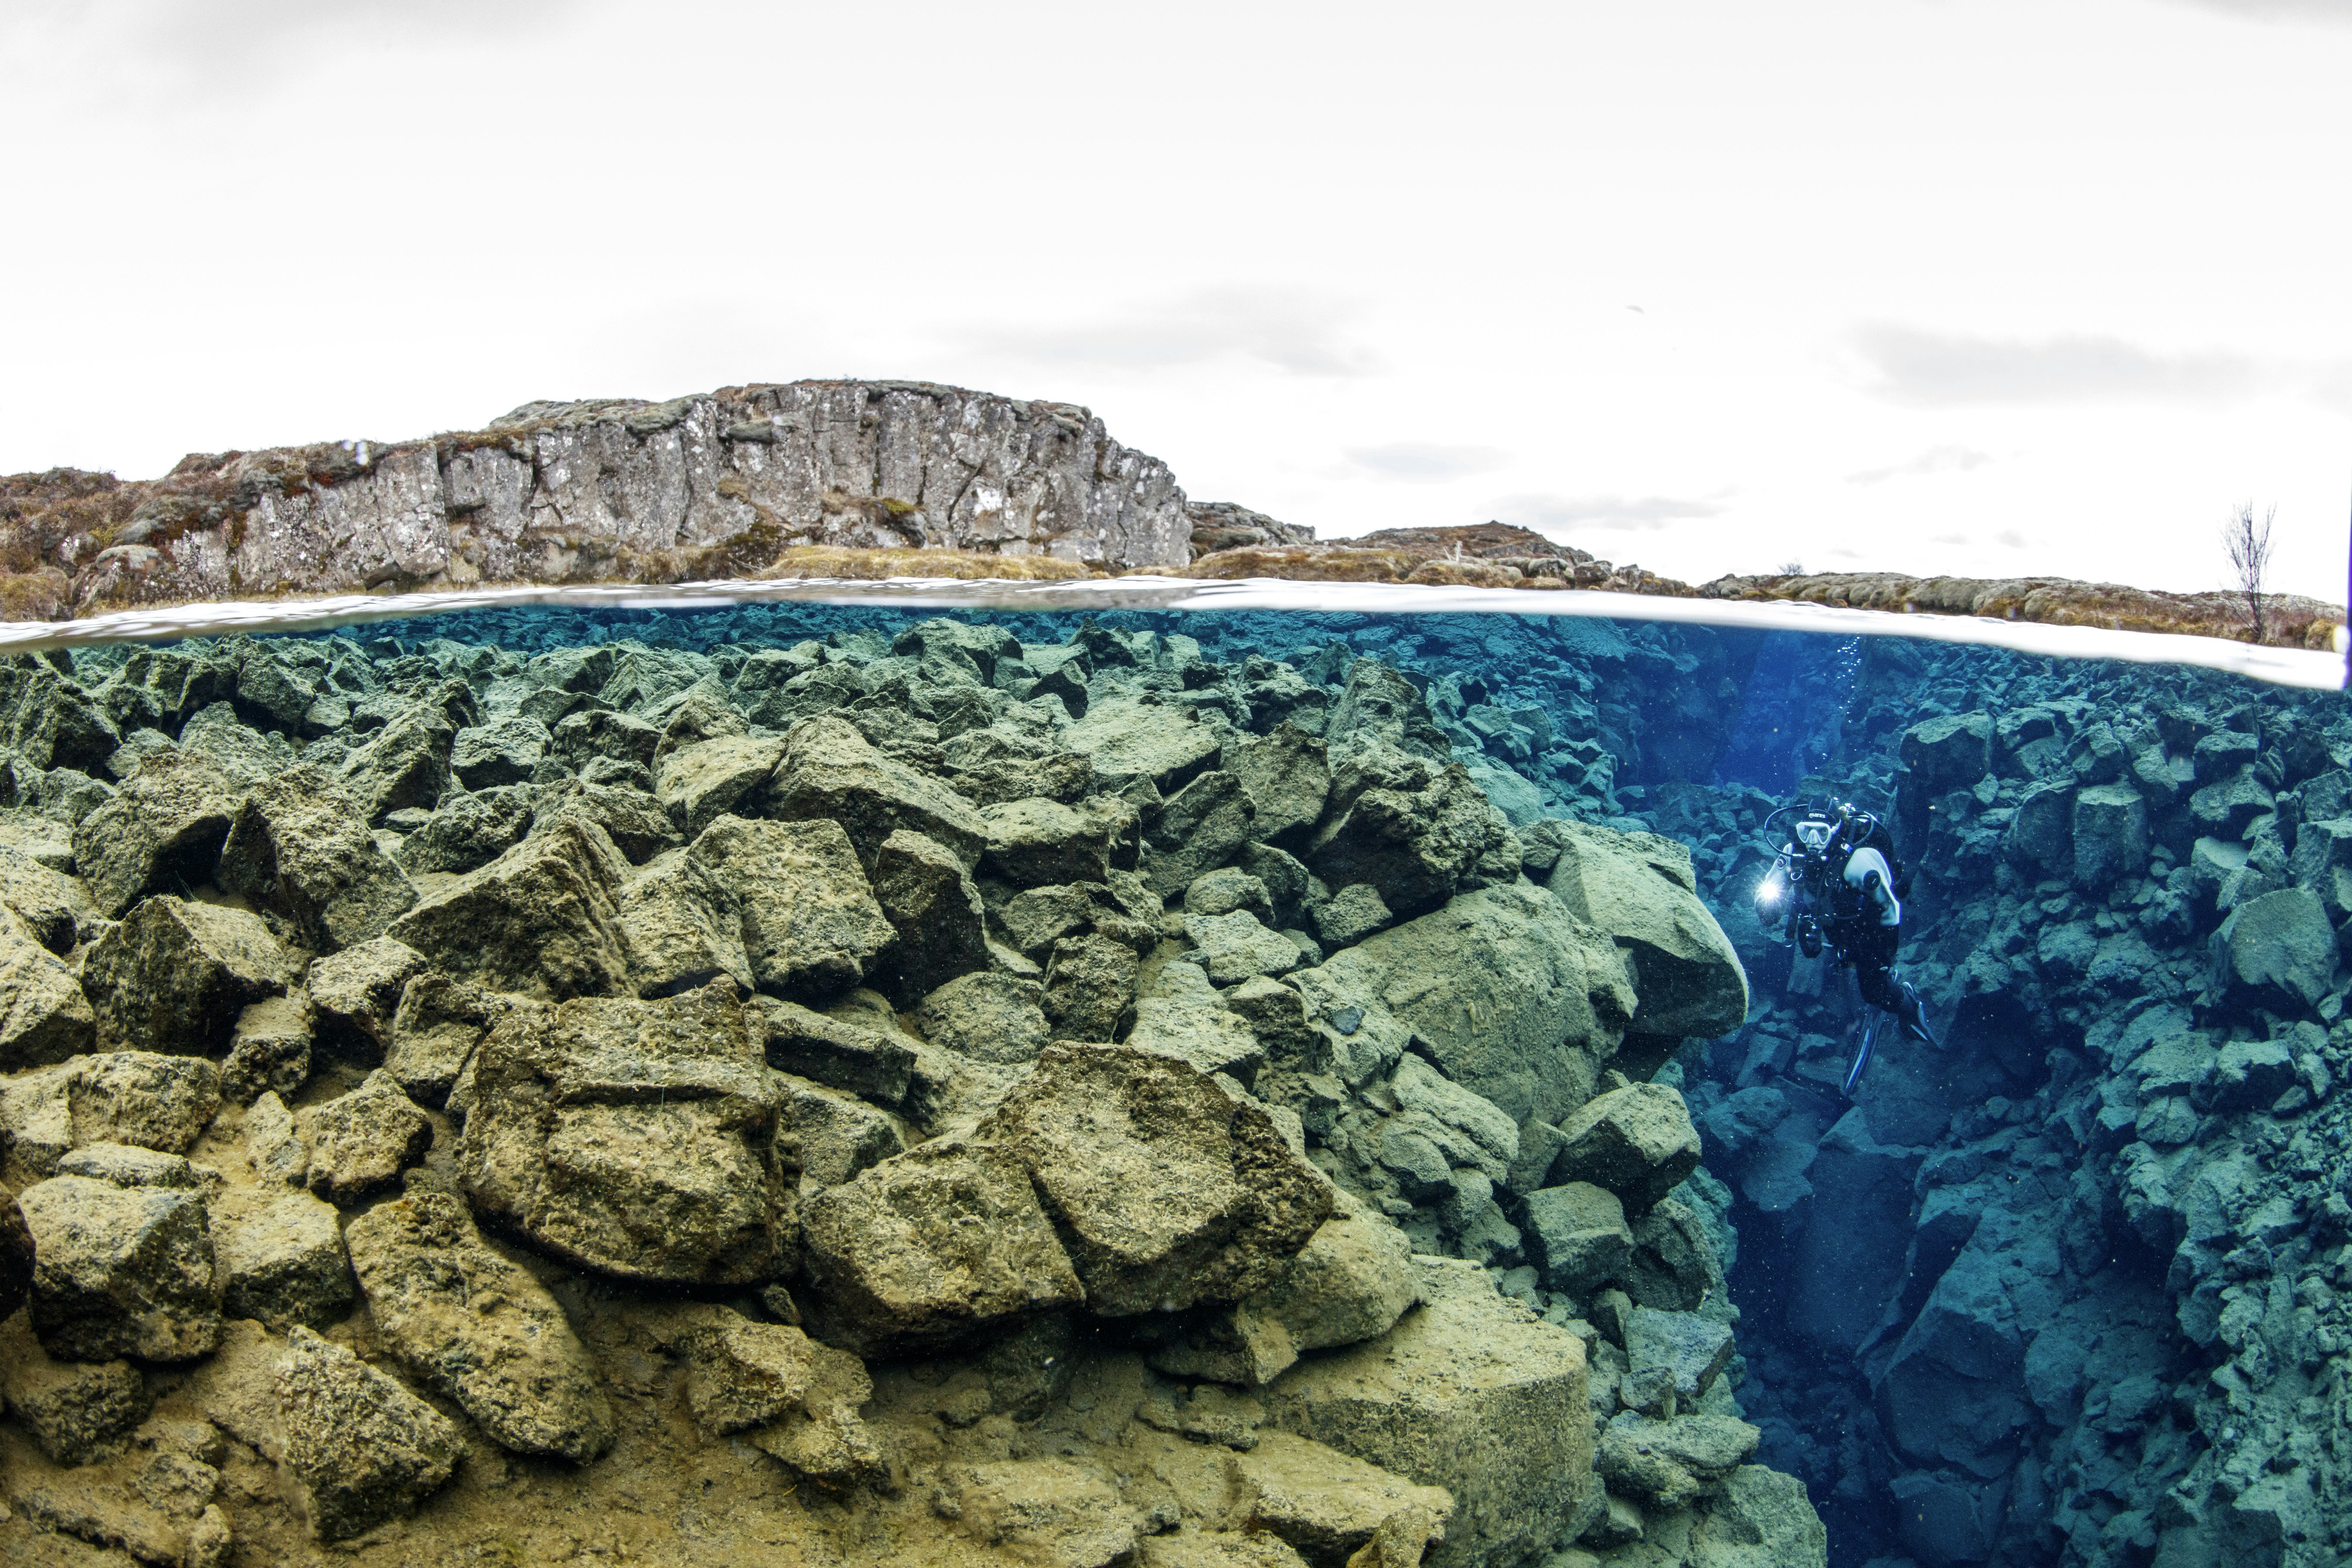 The top third of the shot shows the grey, rocky shore around the Silfra Fissure in Thingvellir National Park, while the bottom two thirds show what's under water, with a gradient of the tan, grey, turquoise, and deep lbue waters that are perfectly clear, and show a diver with a white light between two tectonic plates that form a narrow, rocky canyon